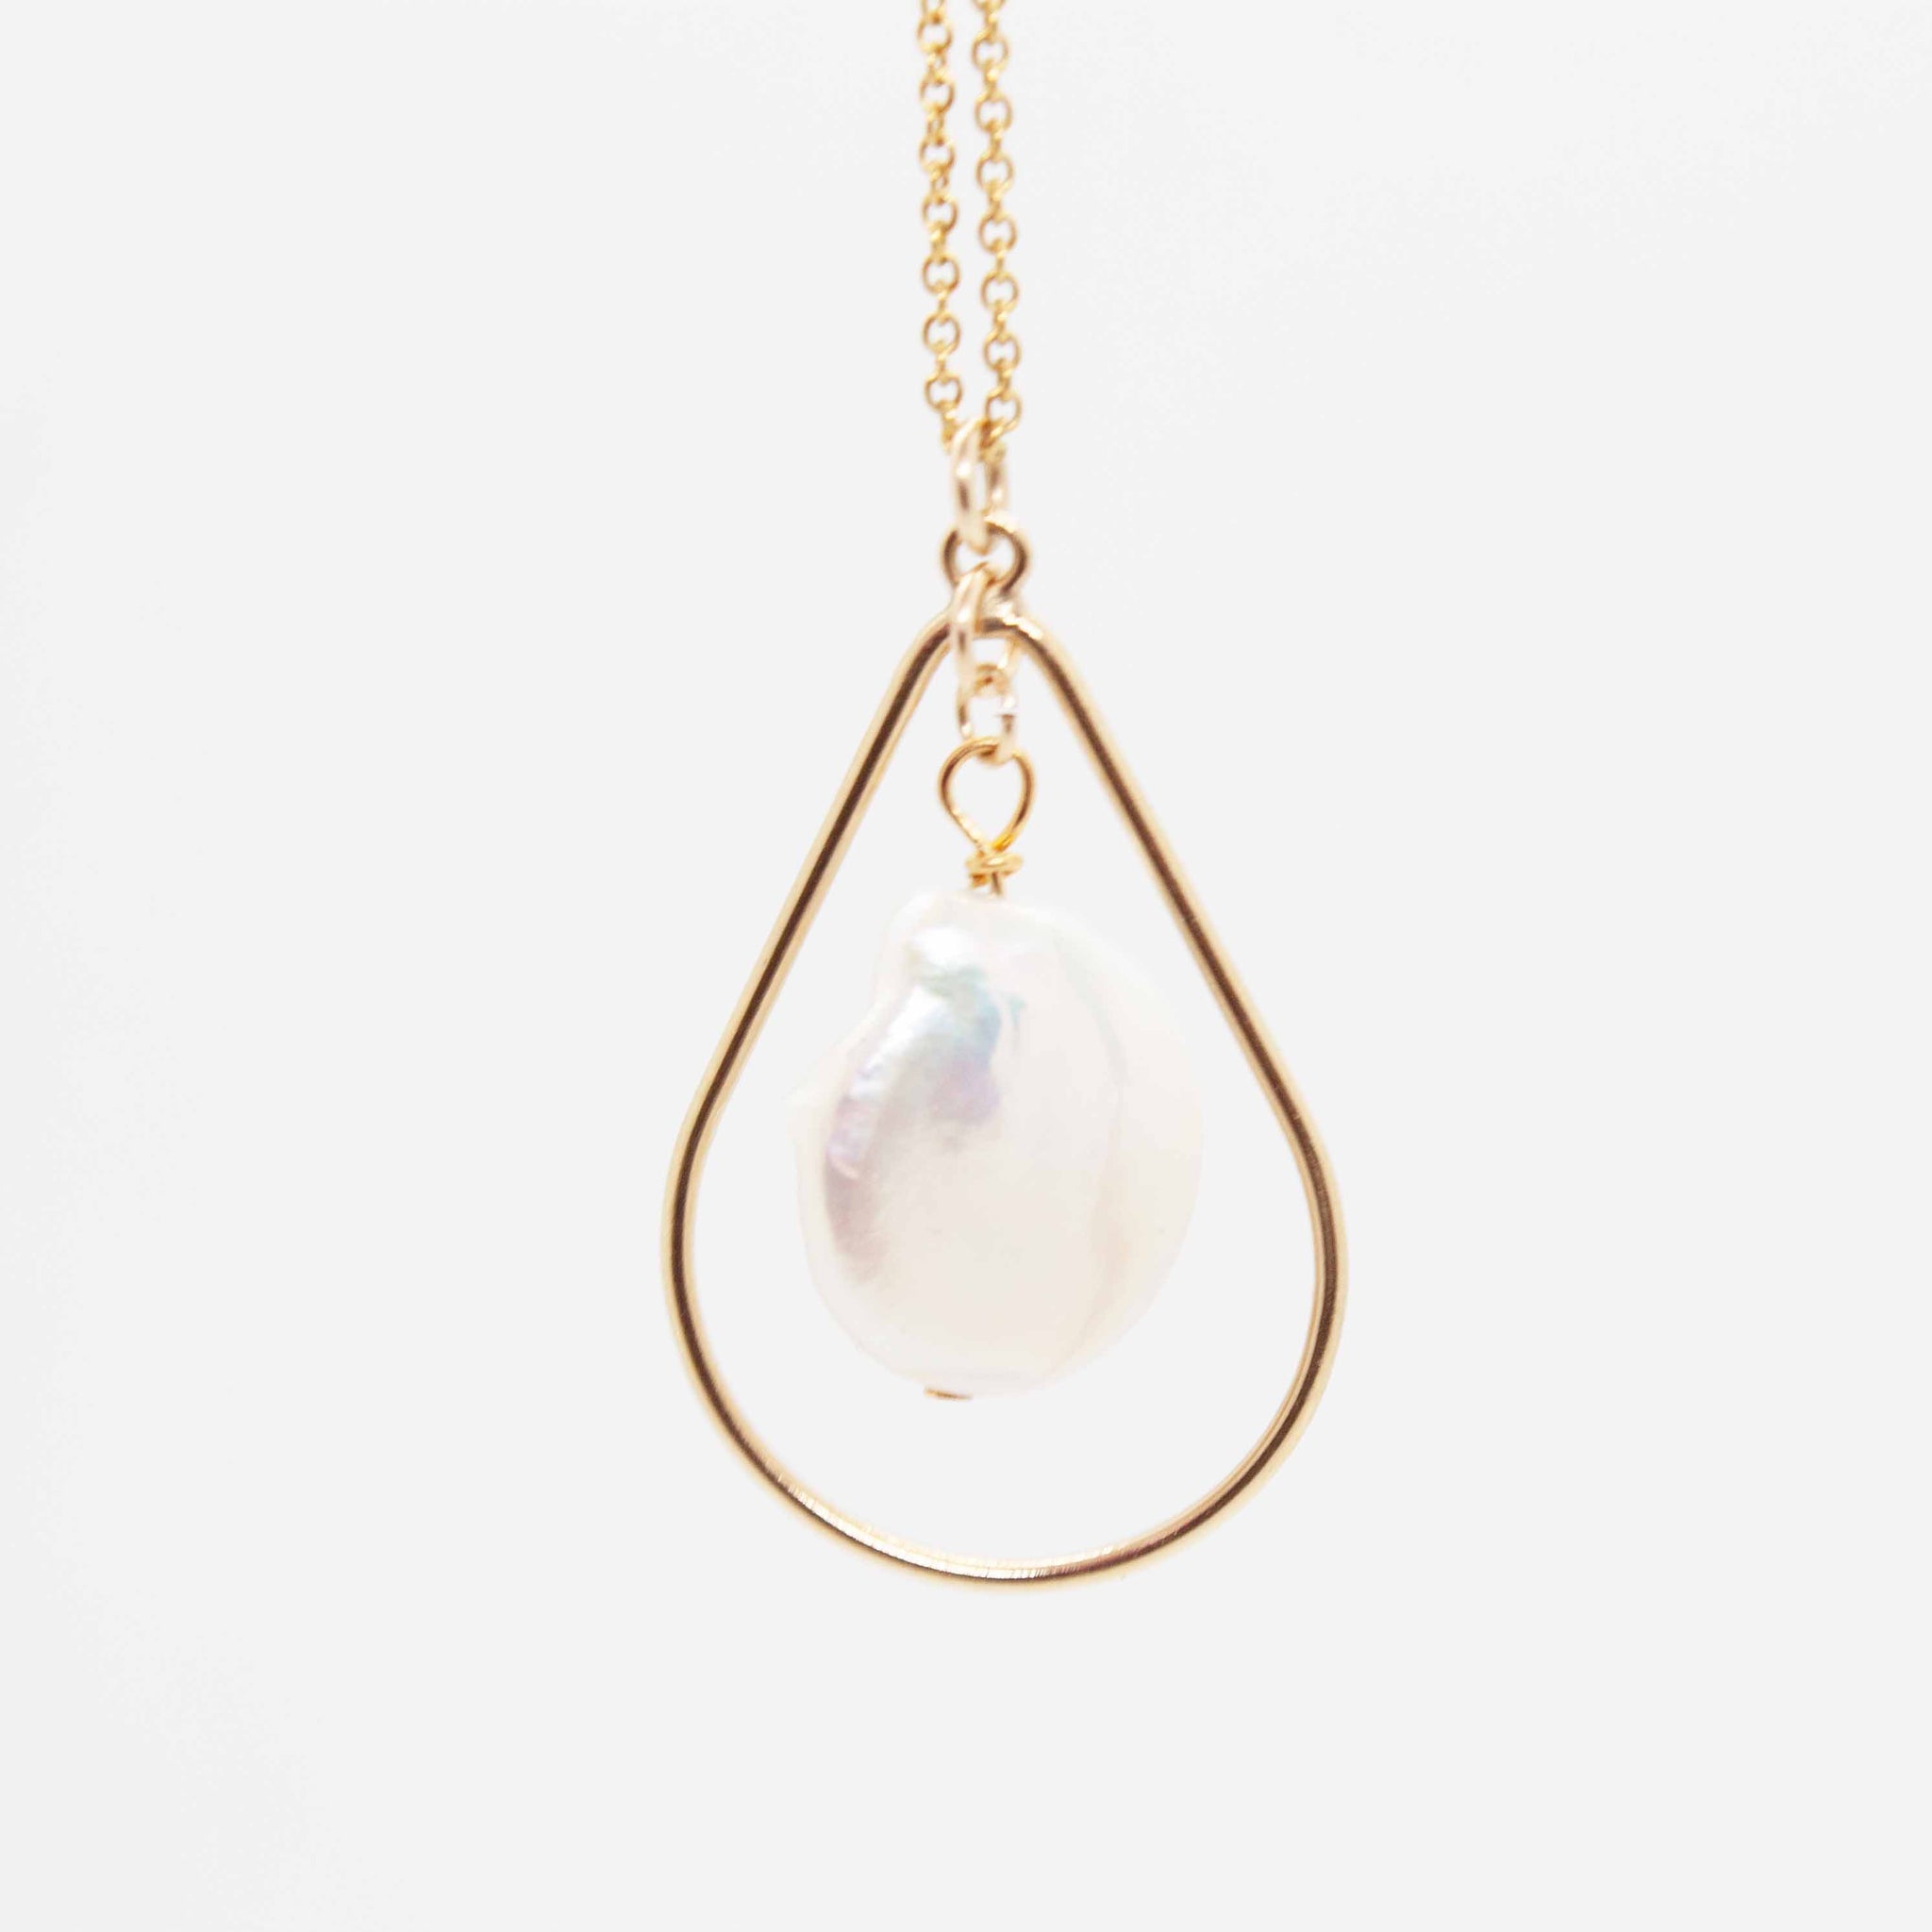 Designed with inspiration from a fellow fearless female, Lisa's necklace offers a modern shape with a classic pearl to freshen up your everyday! 16, 18 or 20 inch gold filled necklace with 1 1/4 inch gold filled teardrop pendant and keshi pearl. Handmade in Toronto by kp jewelry co.